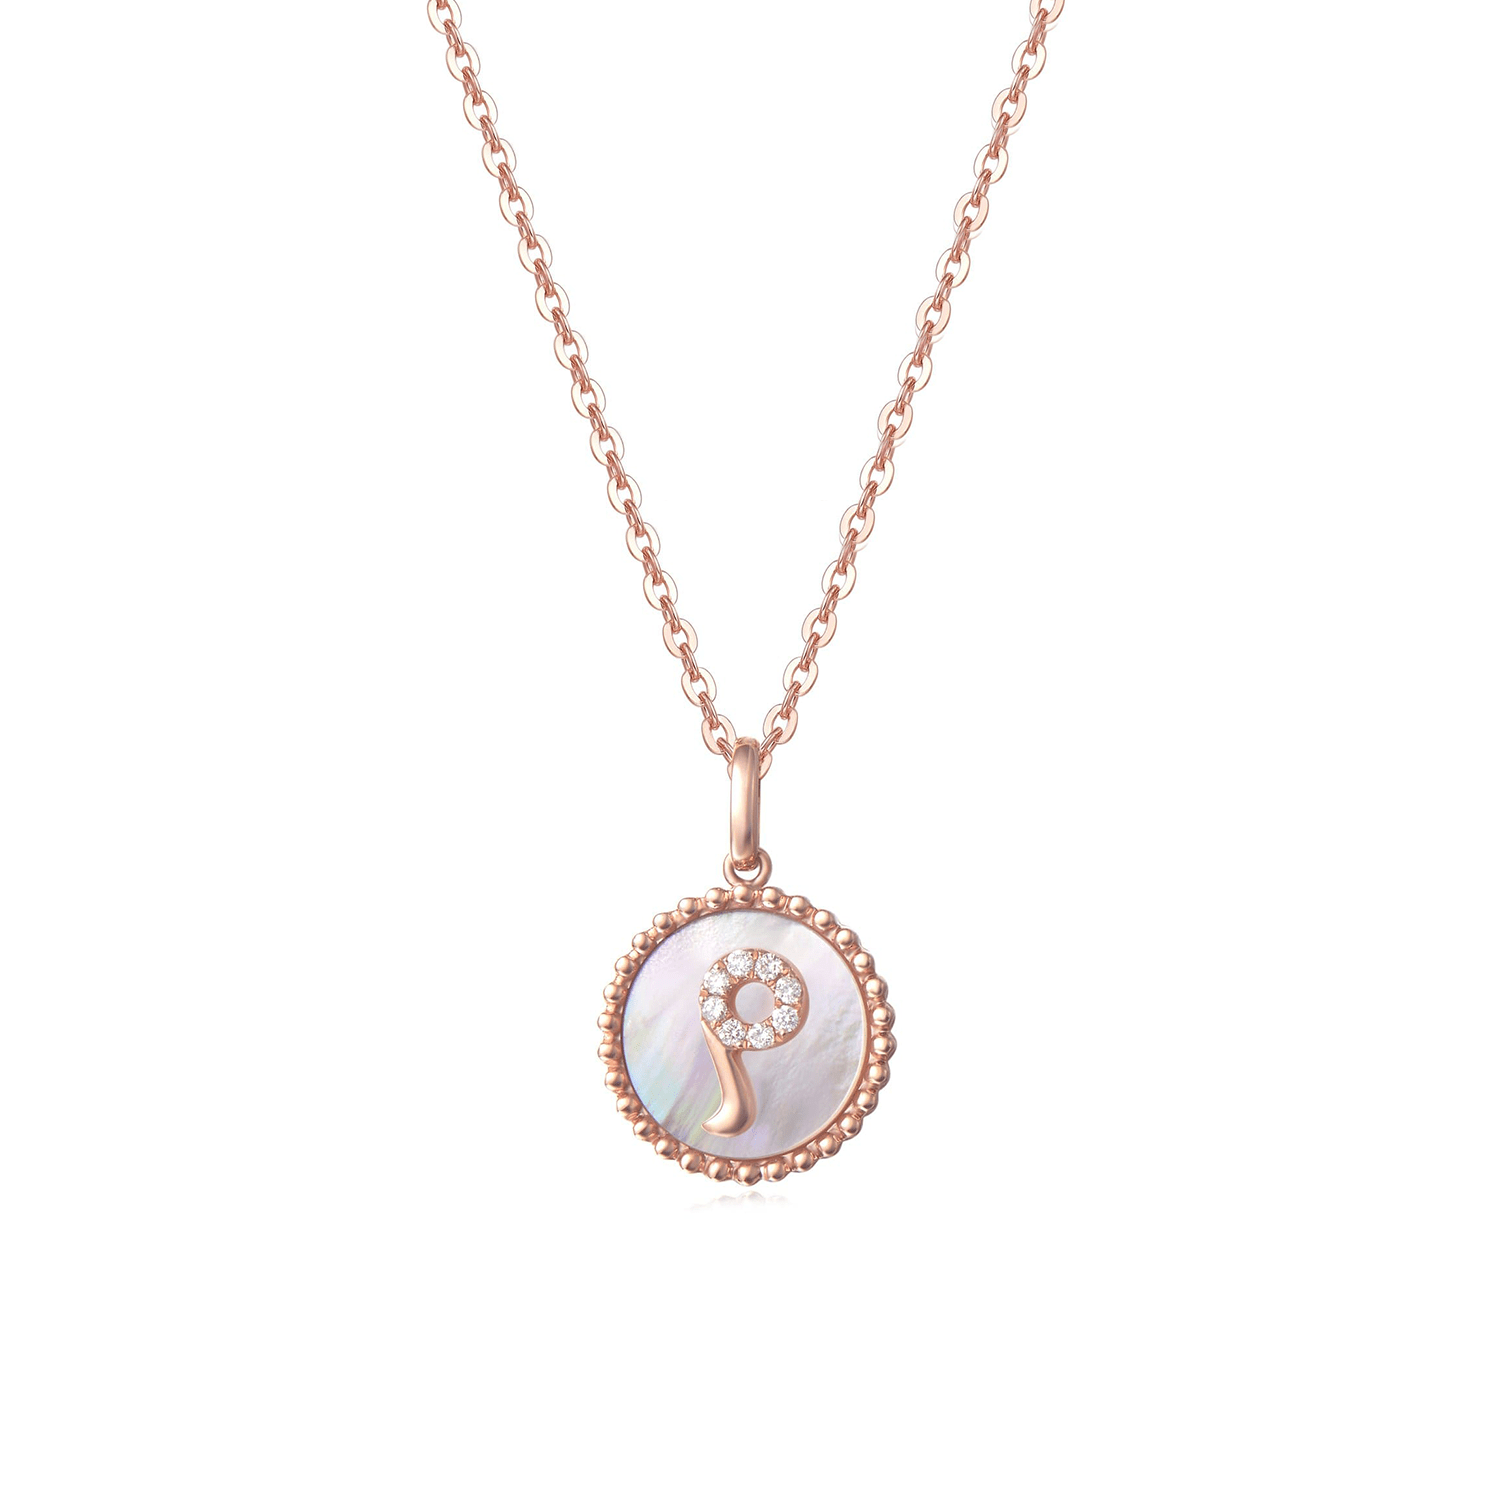 FANCIME "P" Initial Dainty Solid 14K Rose Gold Necklace Main